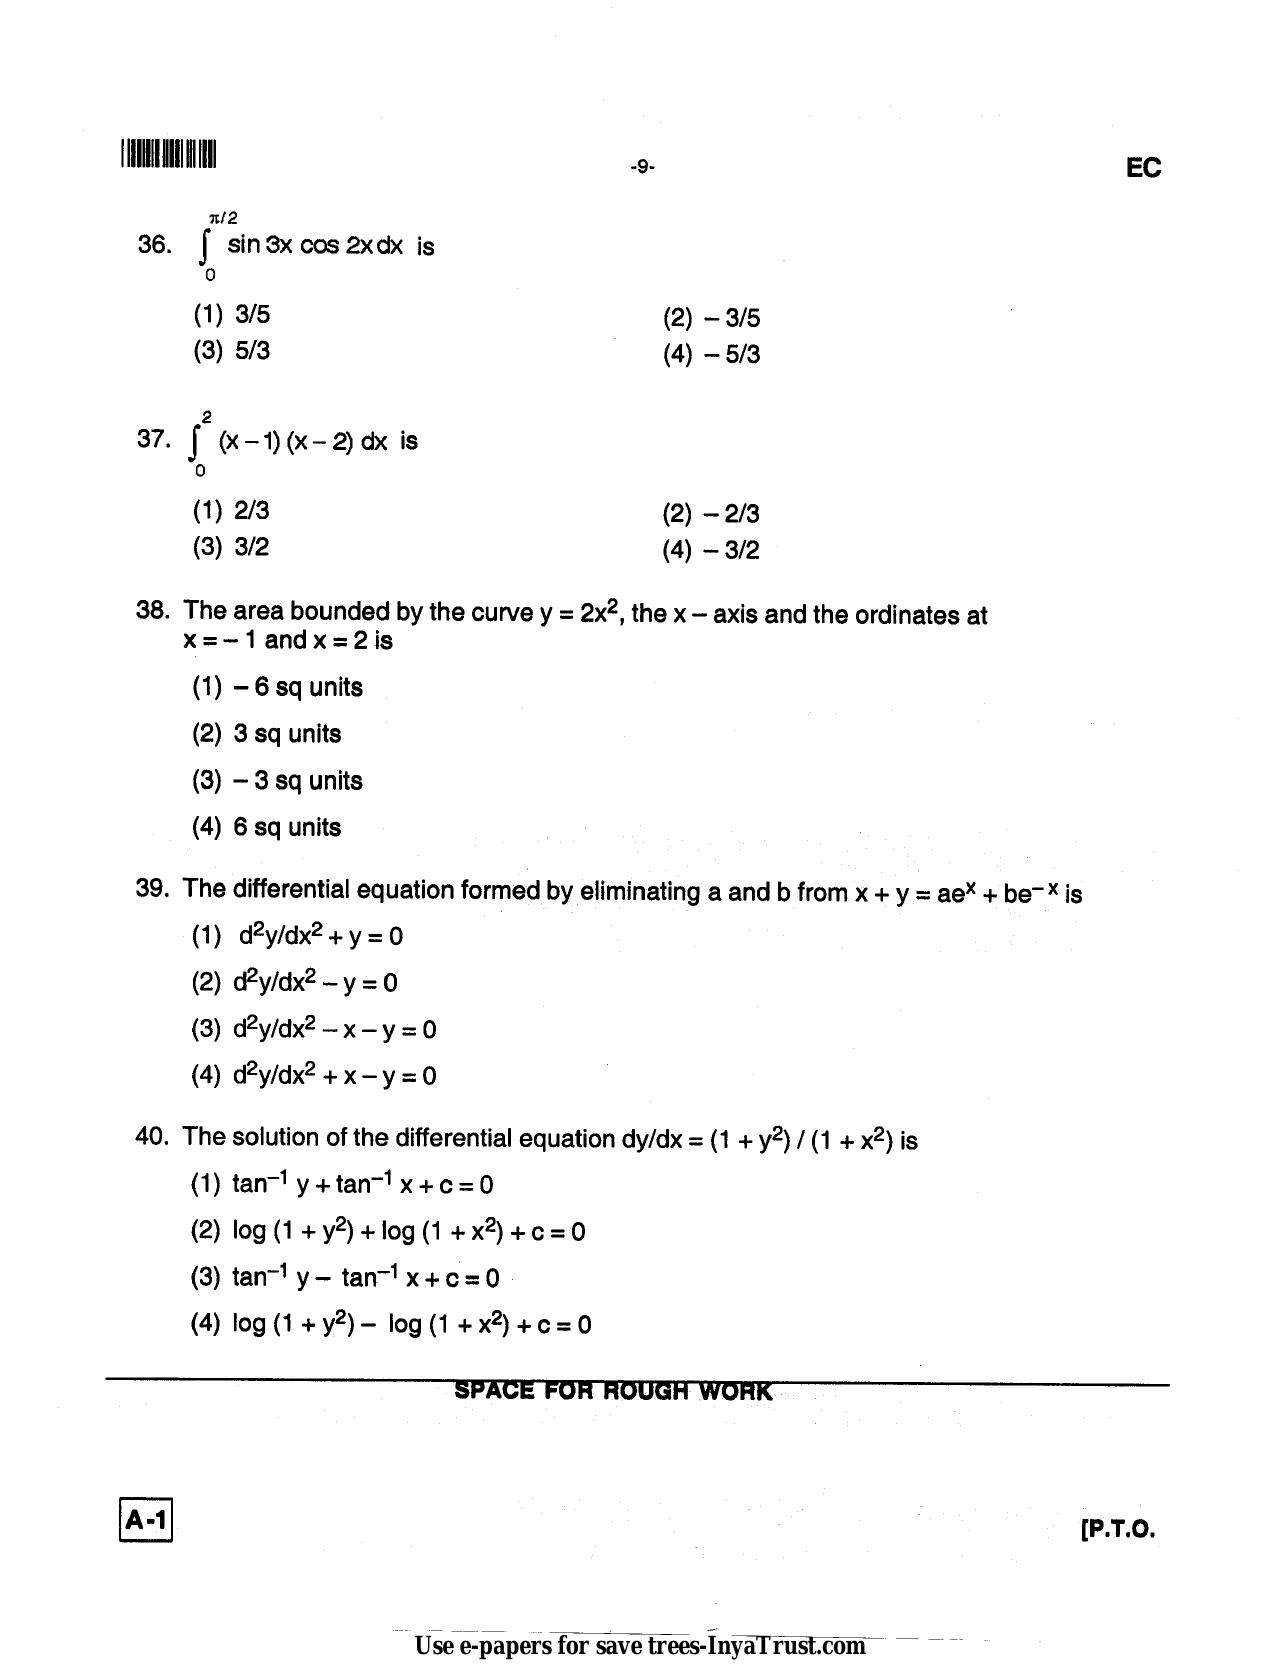 Karnataka Diploma CET- 2013 Electronics and Communication Engineering Question Paper - Page 9